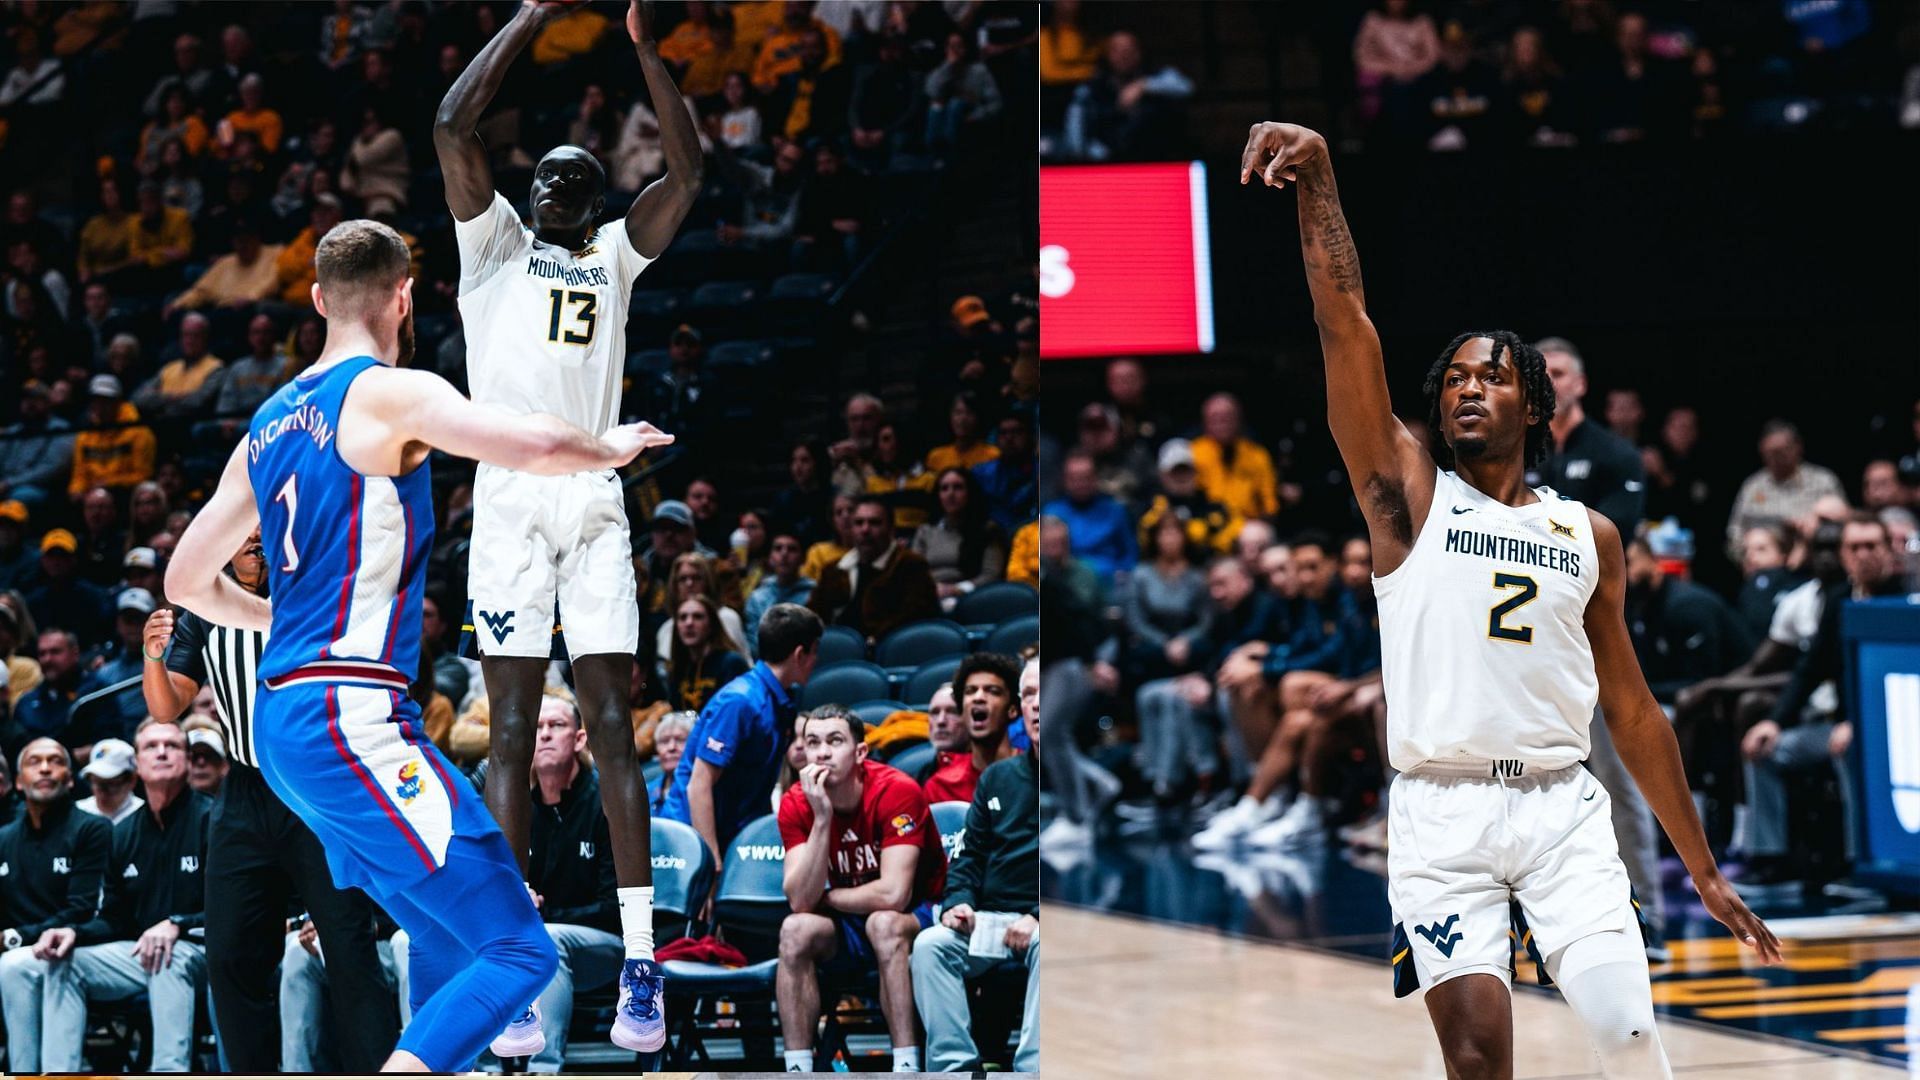 The Mountaineers got the unlikely upset over Kansas